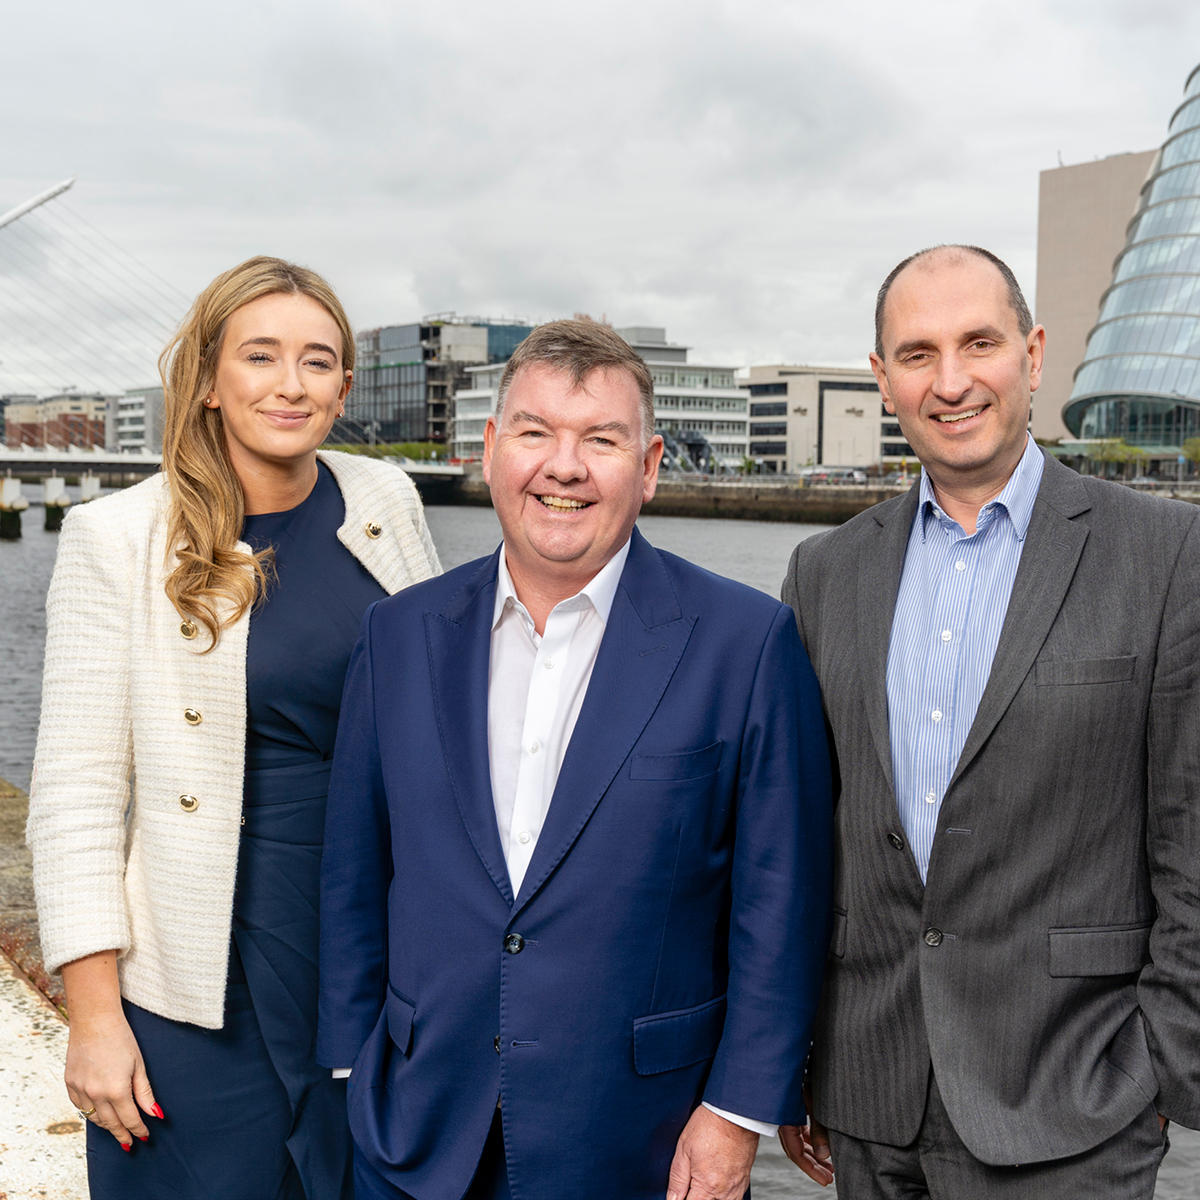 Praxis expands into Ireland